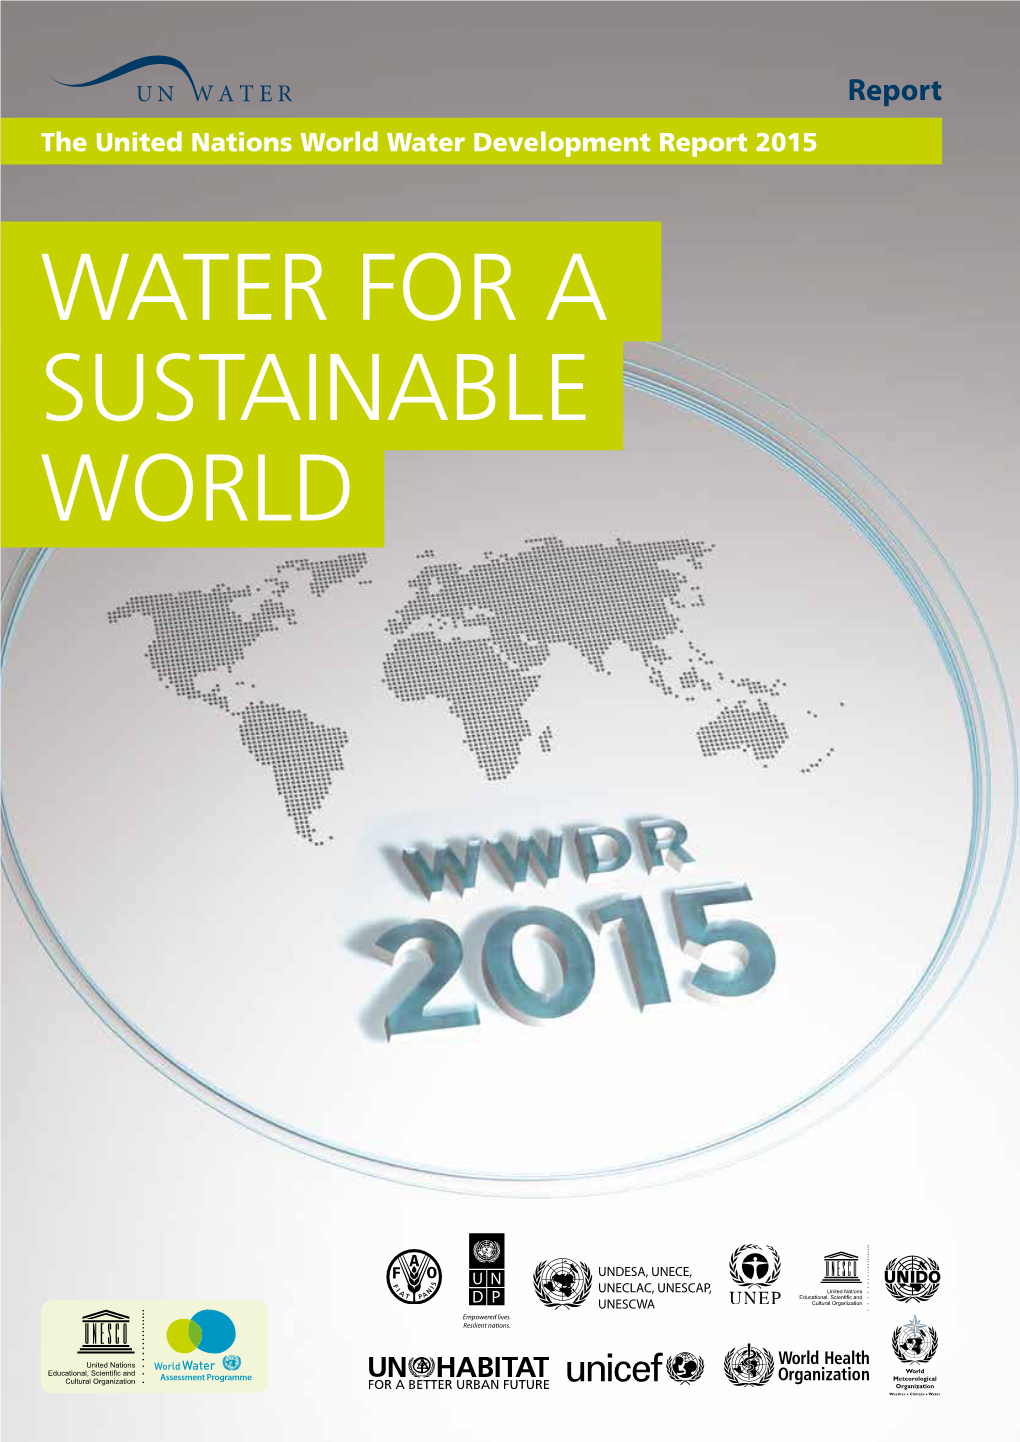 The United Nations World Water Development Report 2015 Water for a Sustainable World